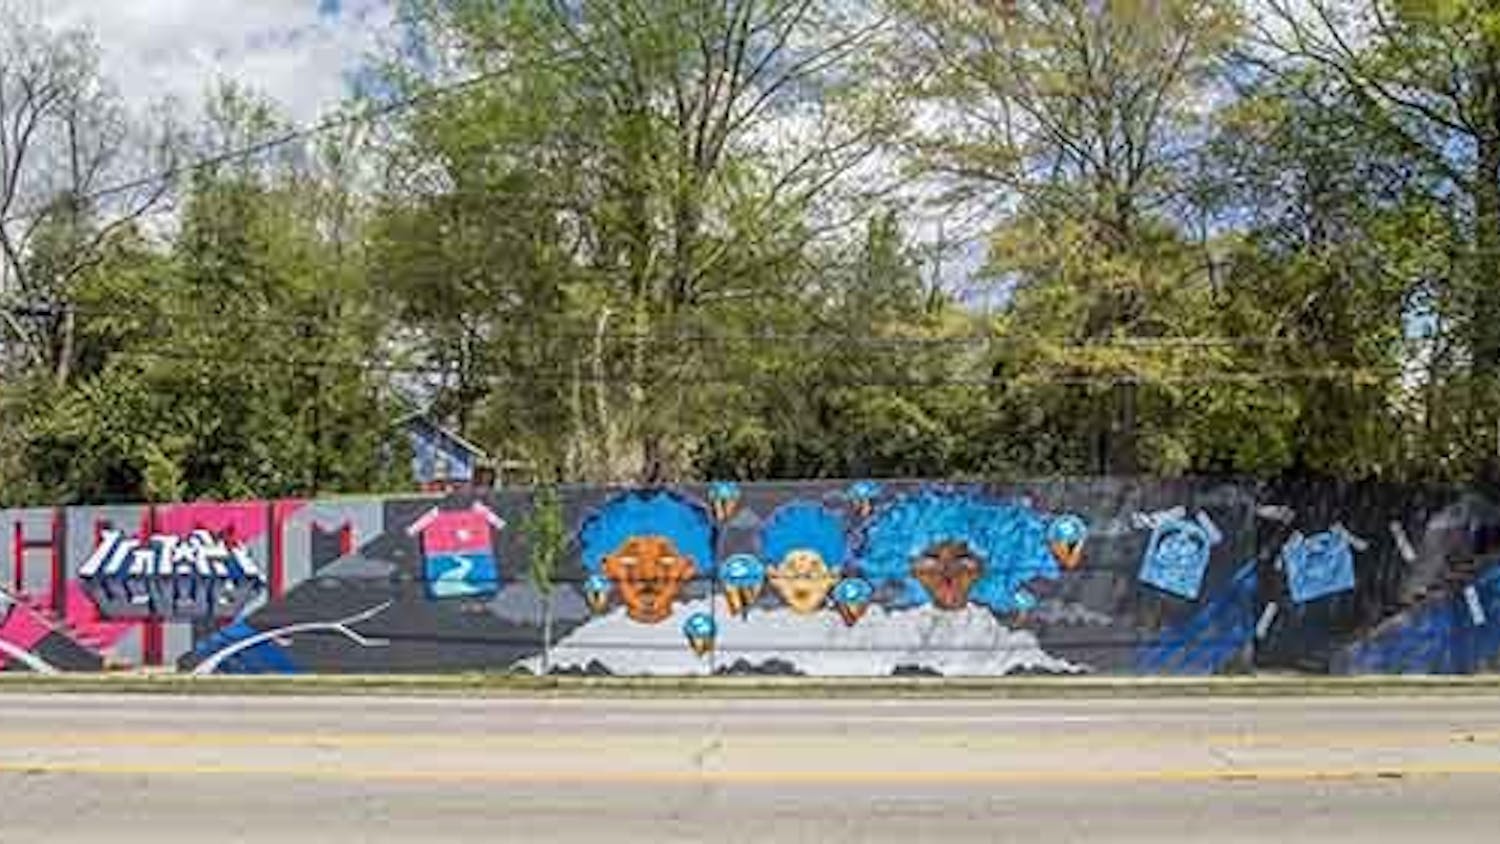 Photo of the triptych mural on Millwood Avenue. This mural was created by Karl Zurfluh, Brandon Donahue and Cedric Umoja.